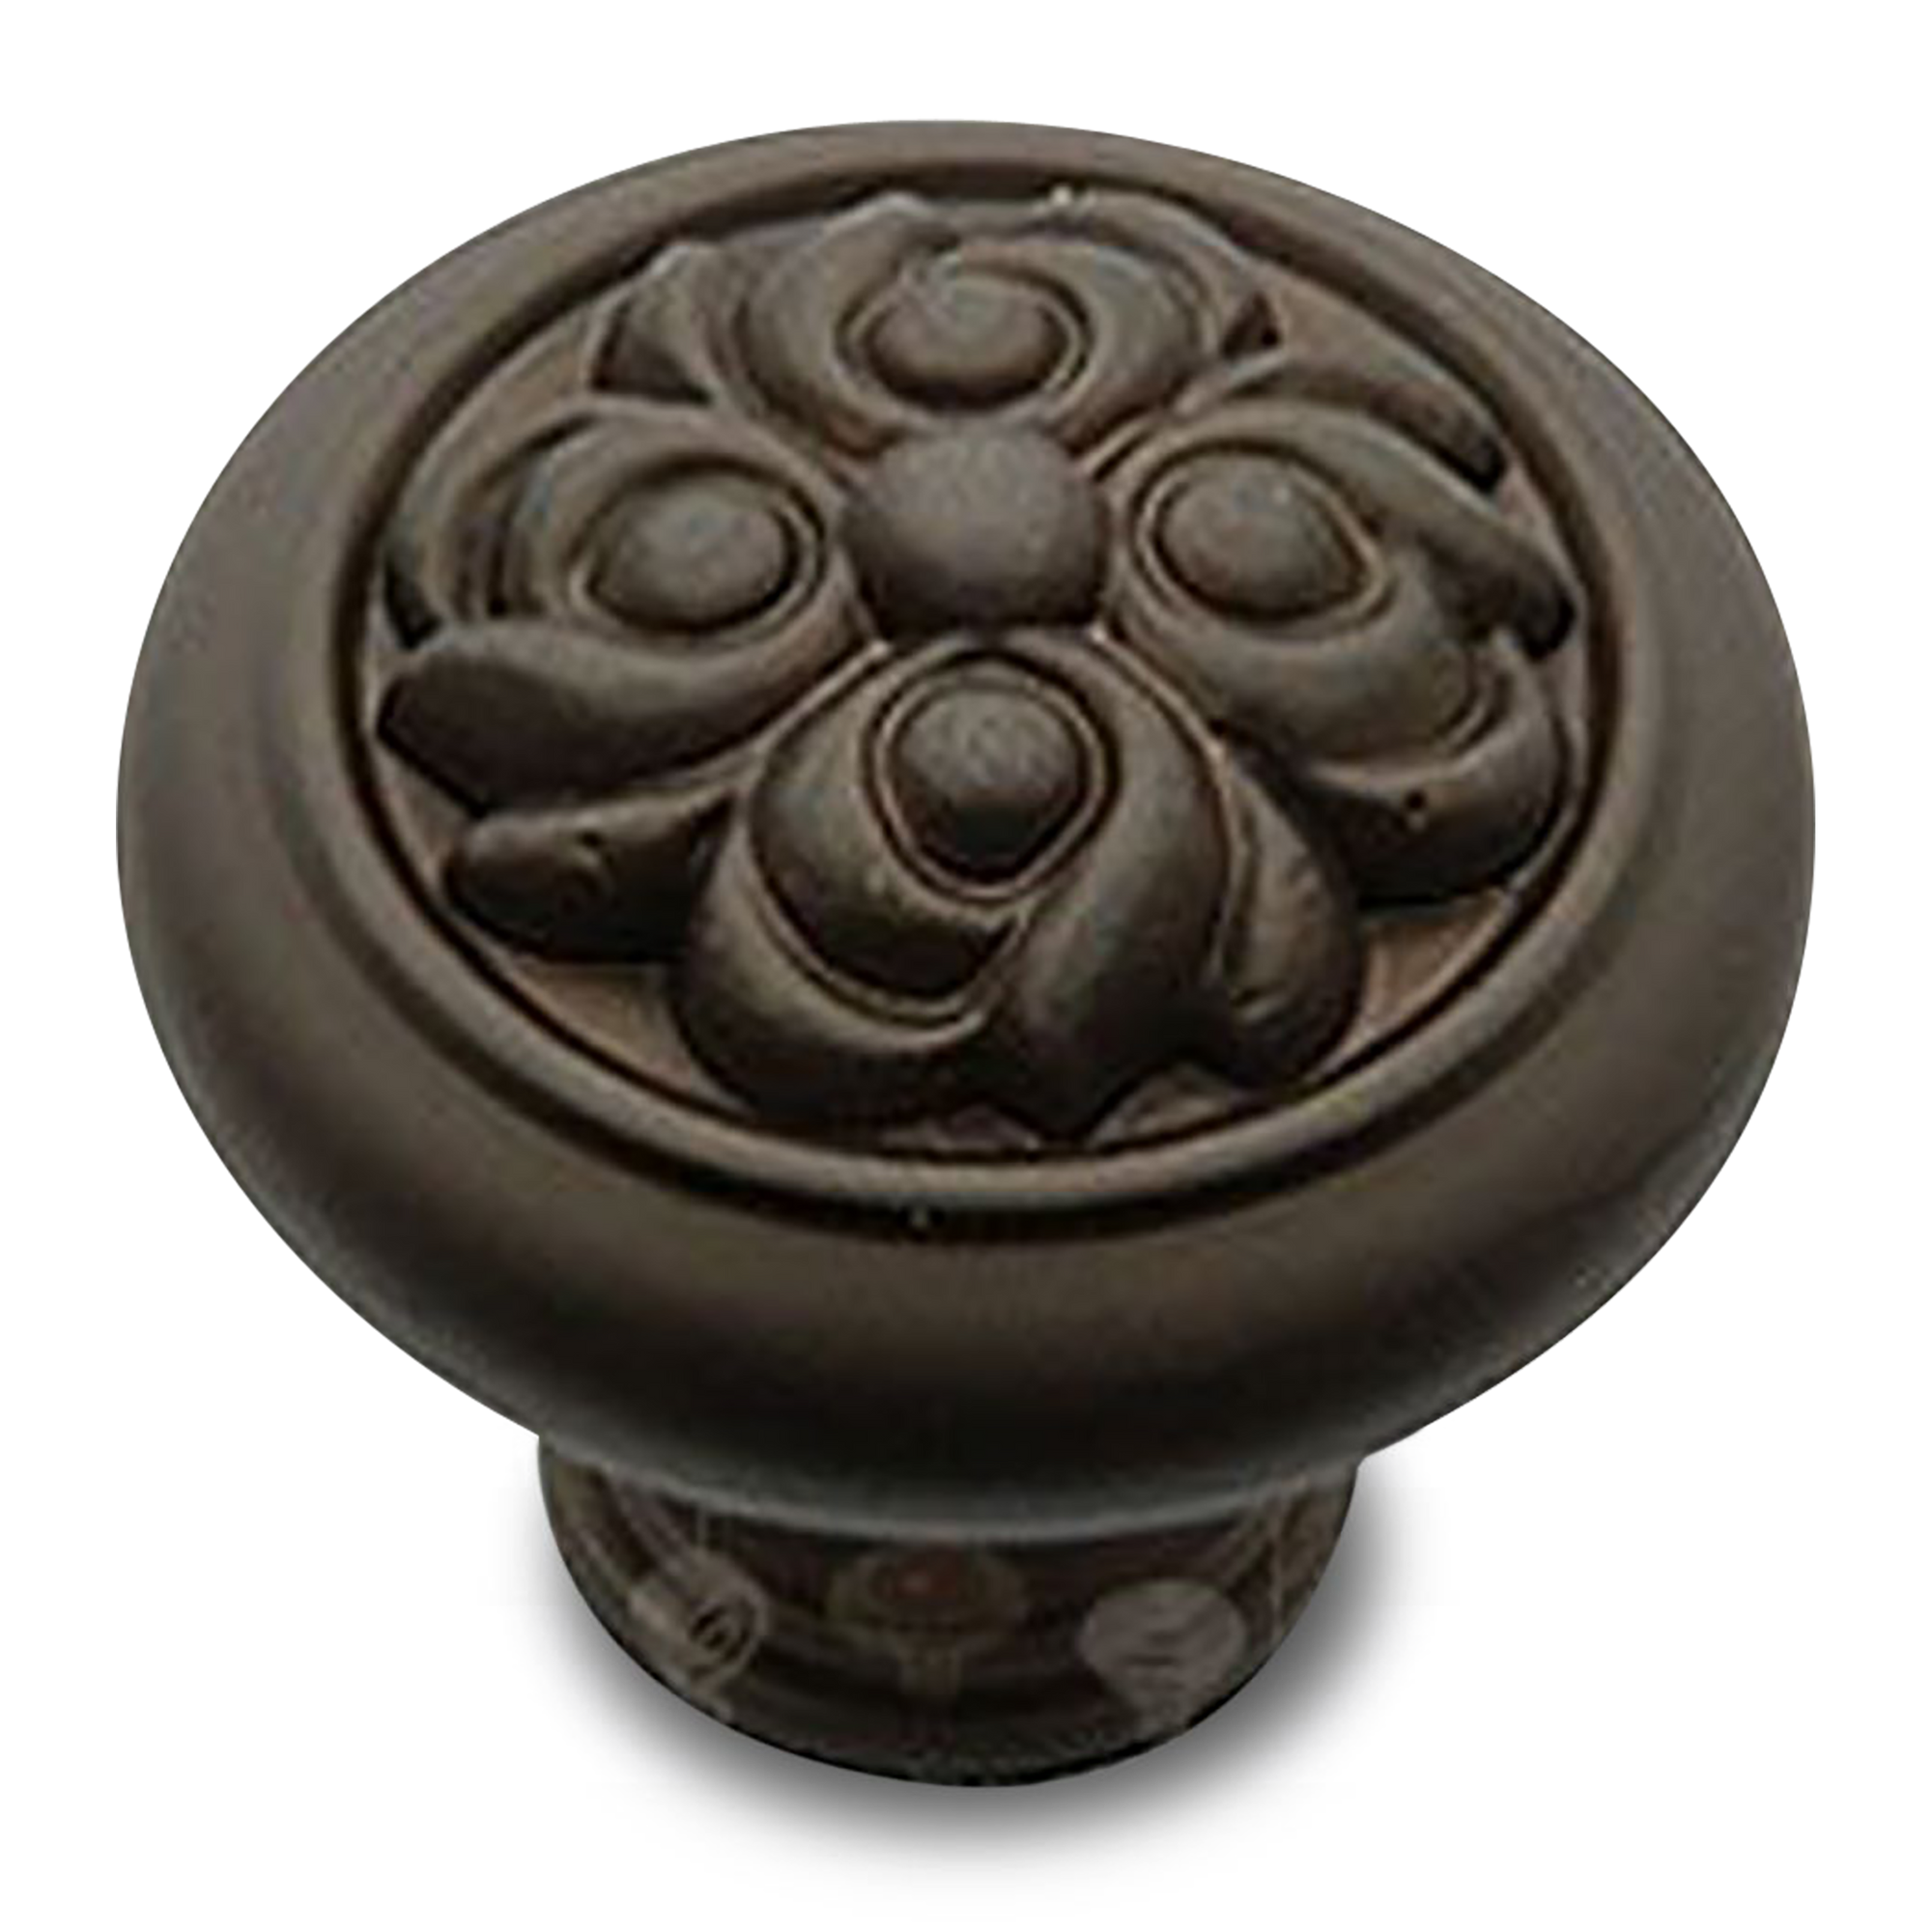 A traditional round knob with an engraved face.